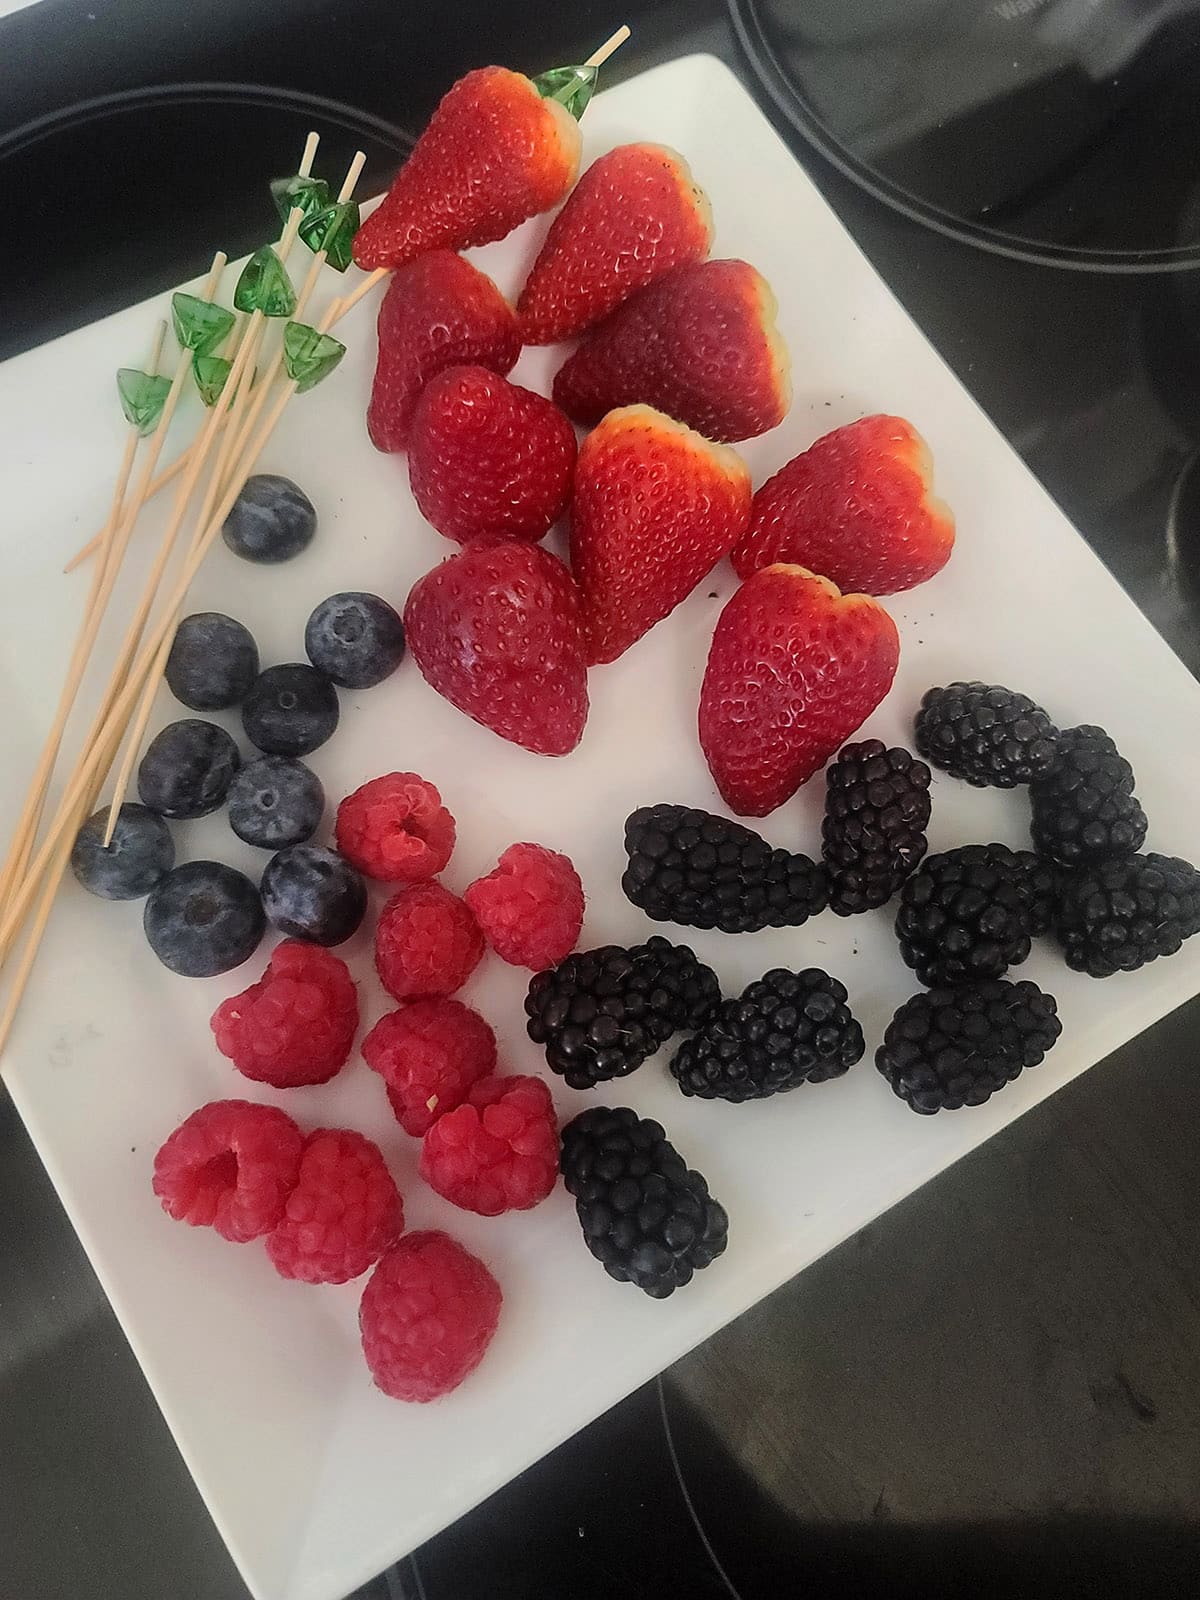 Berries and bamboo skewers laid out on a plate.